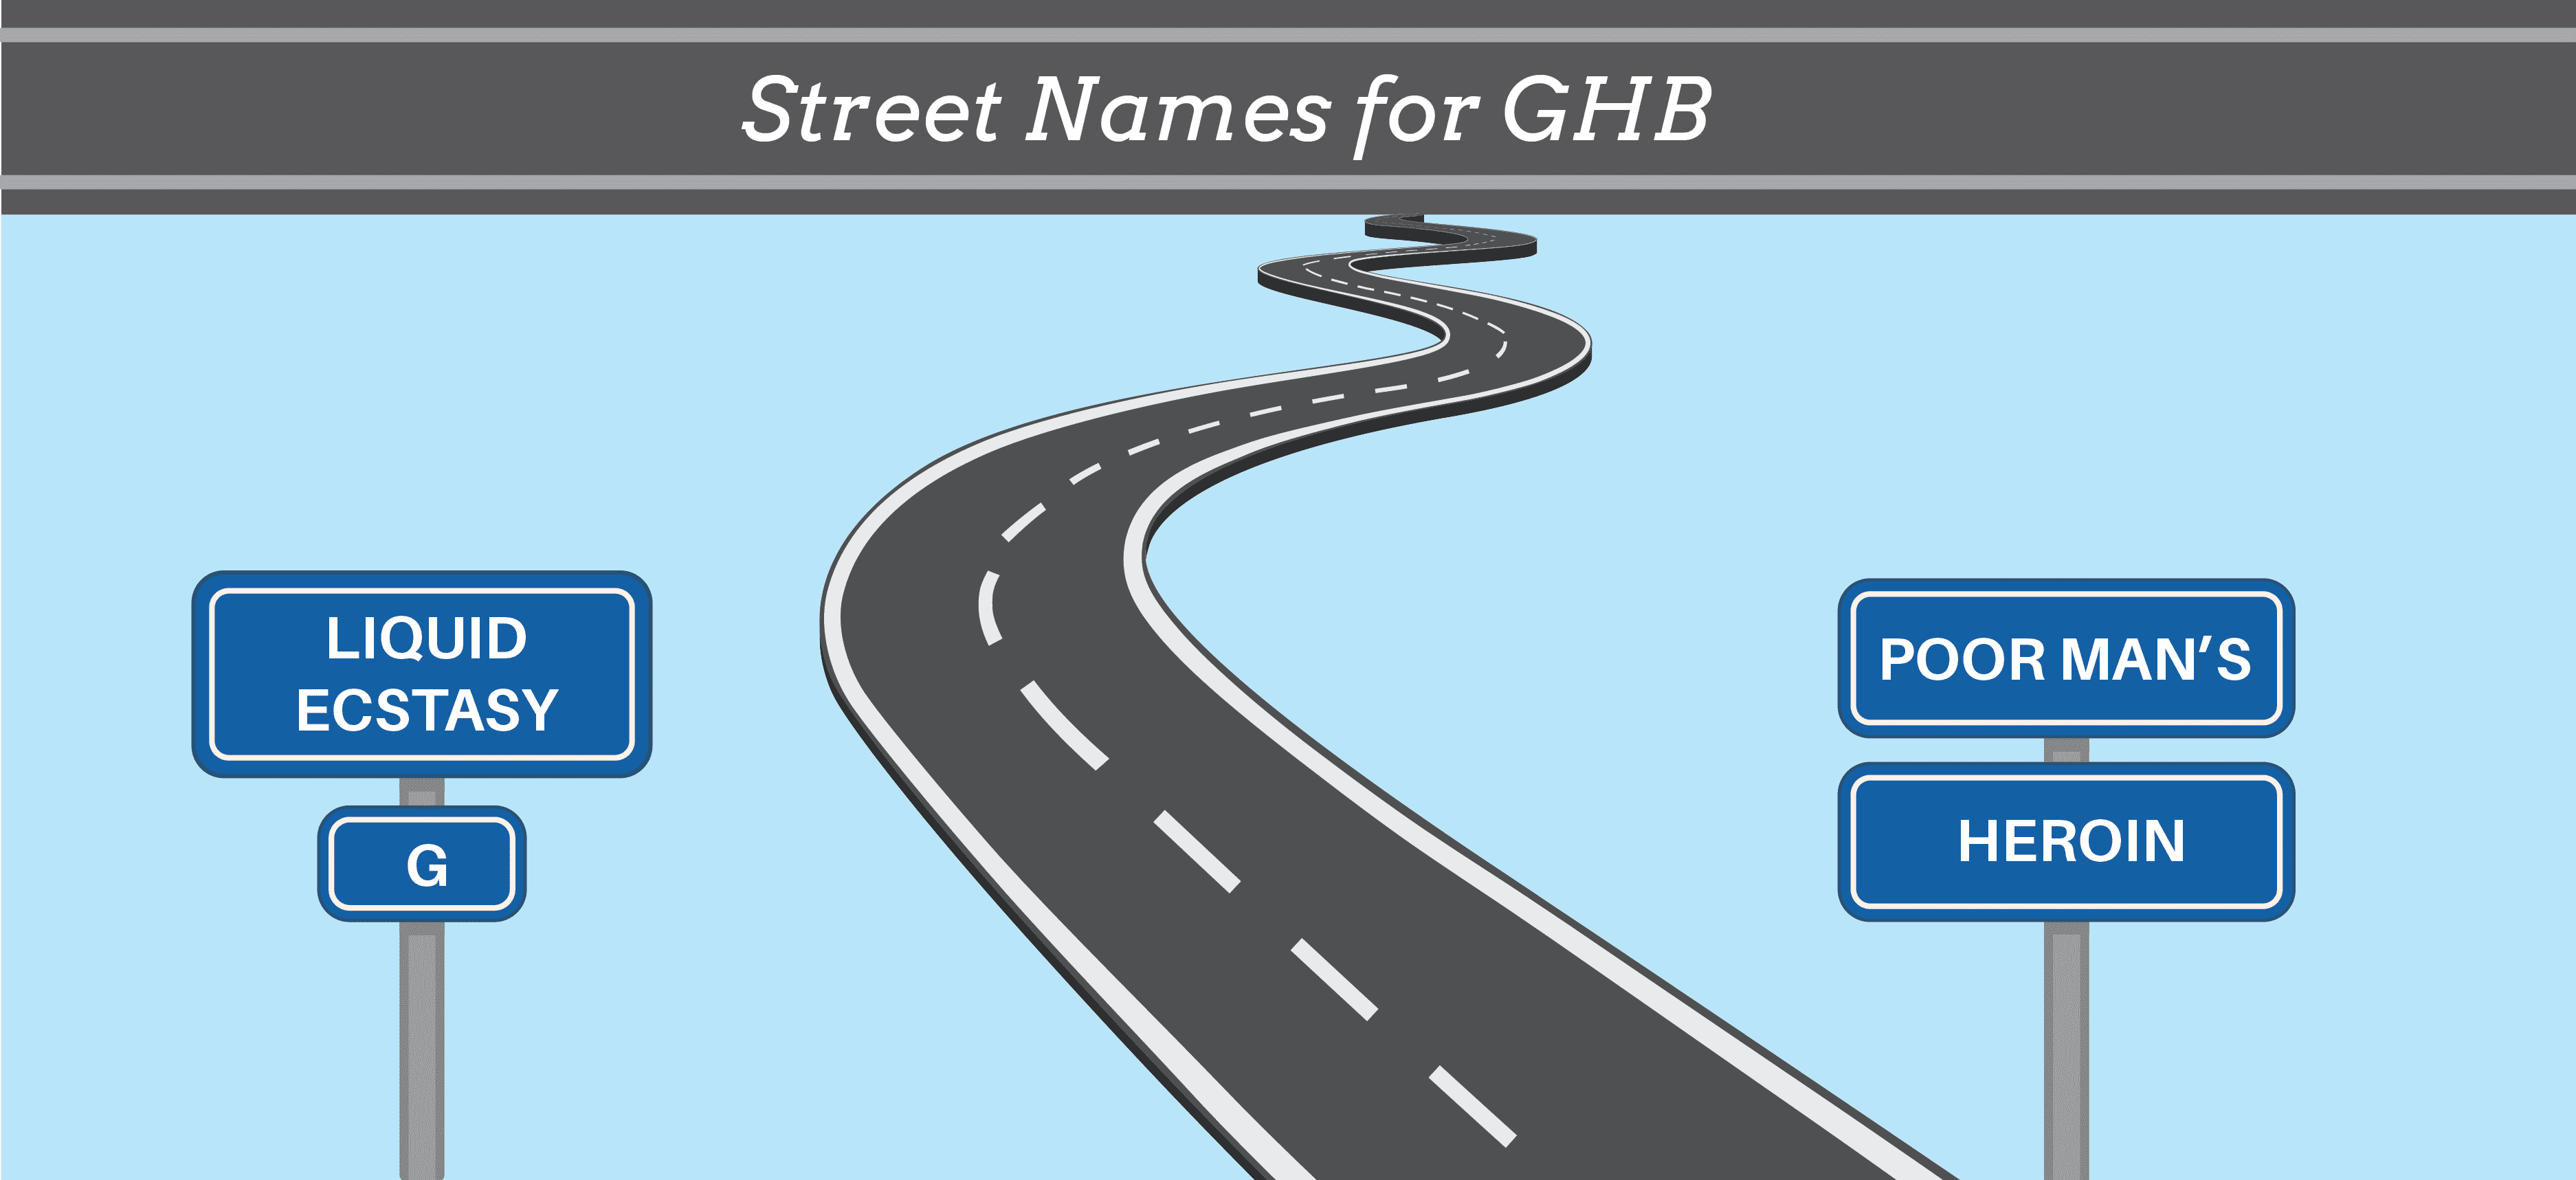 Street Names for GHB